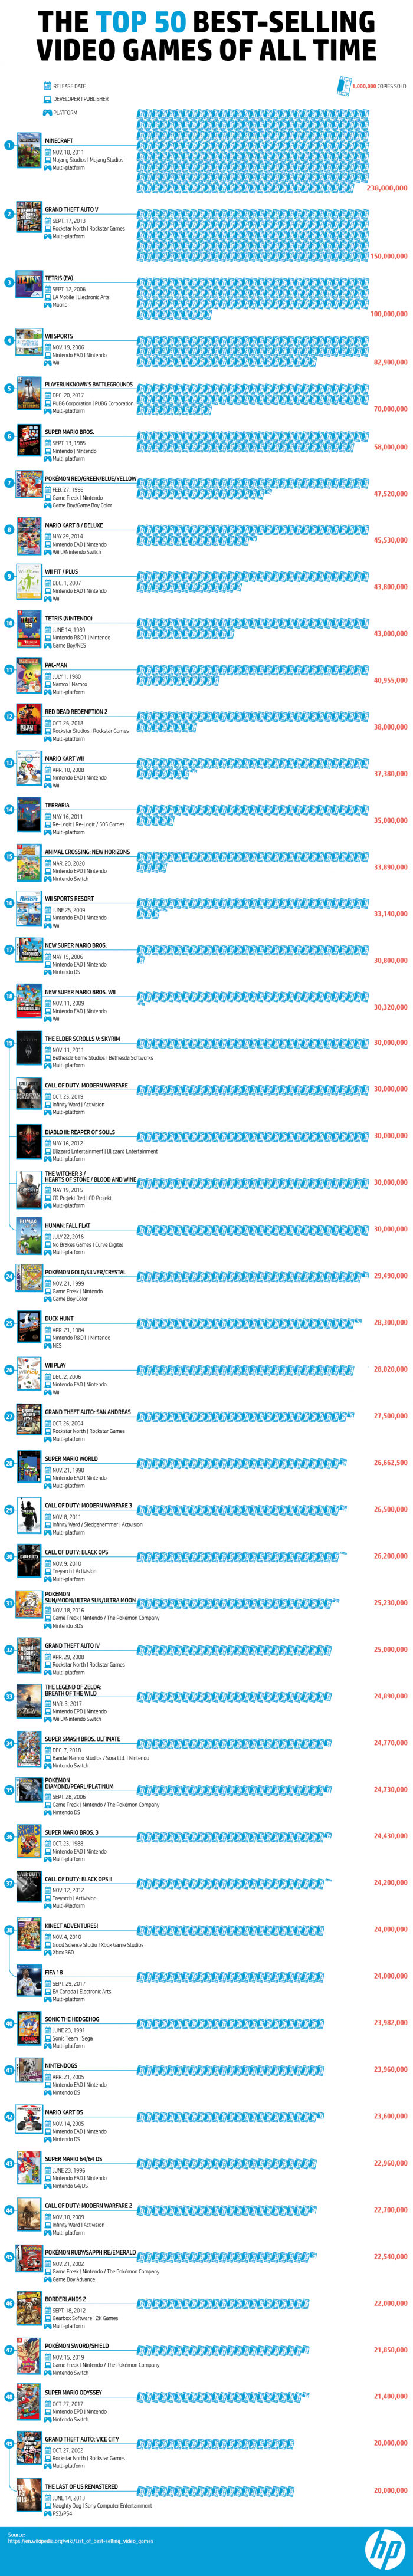 best-selling-video-games-of-all-time